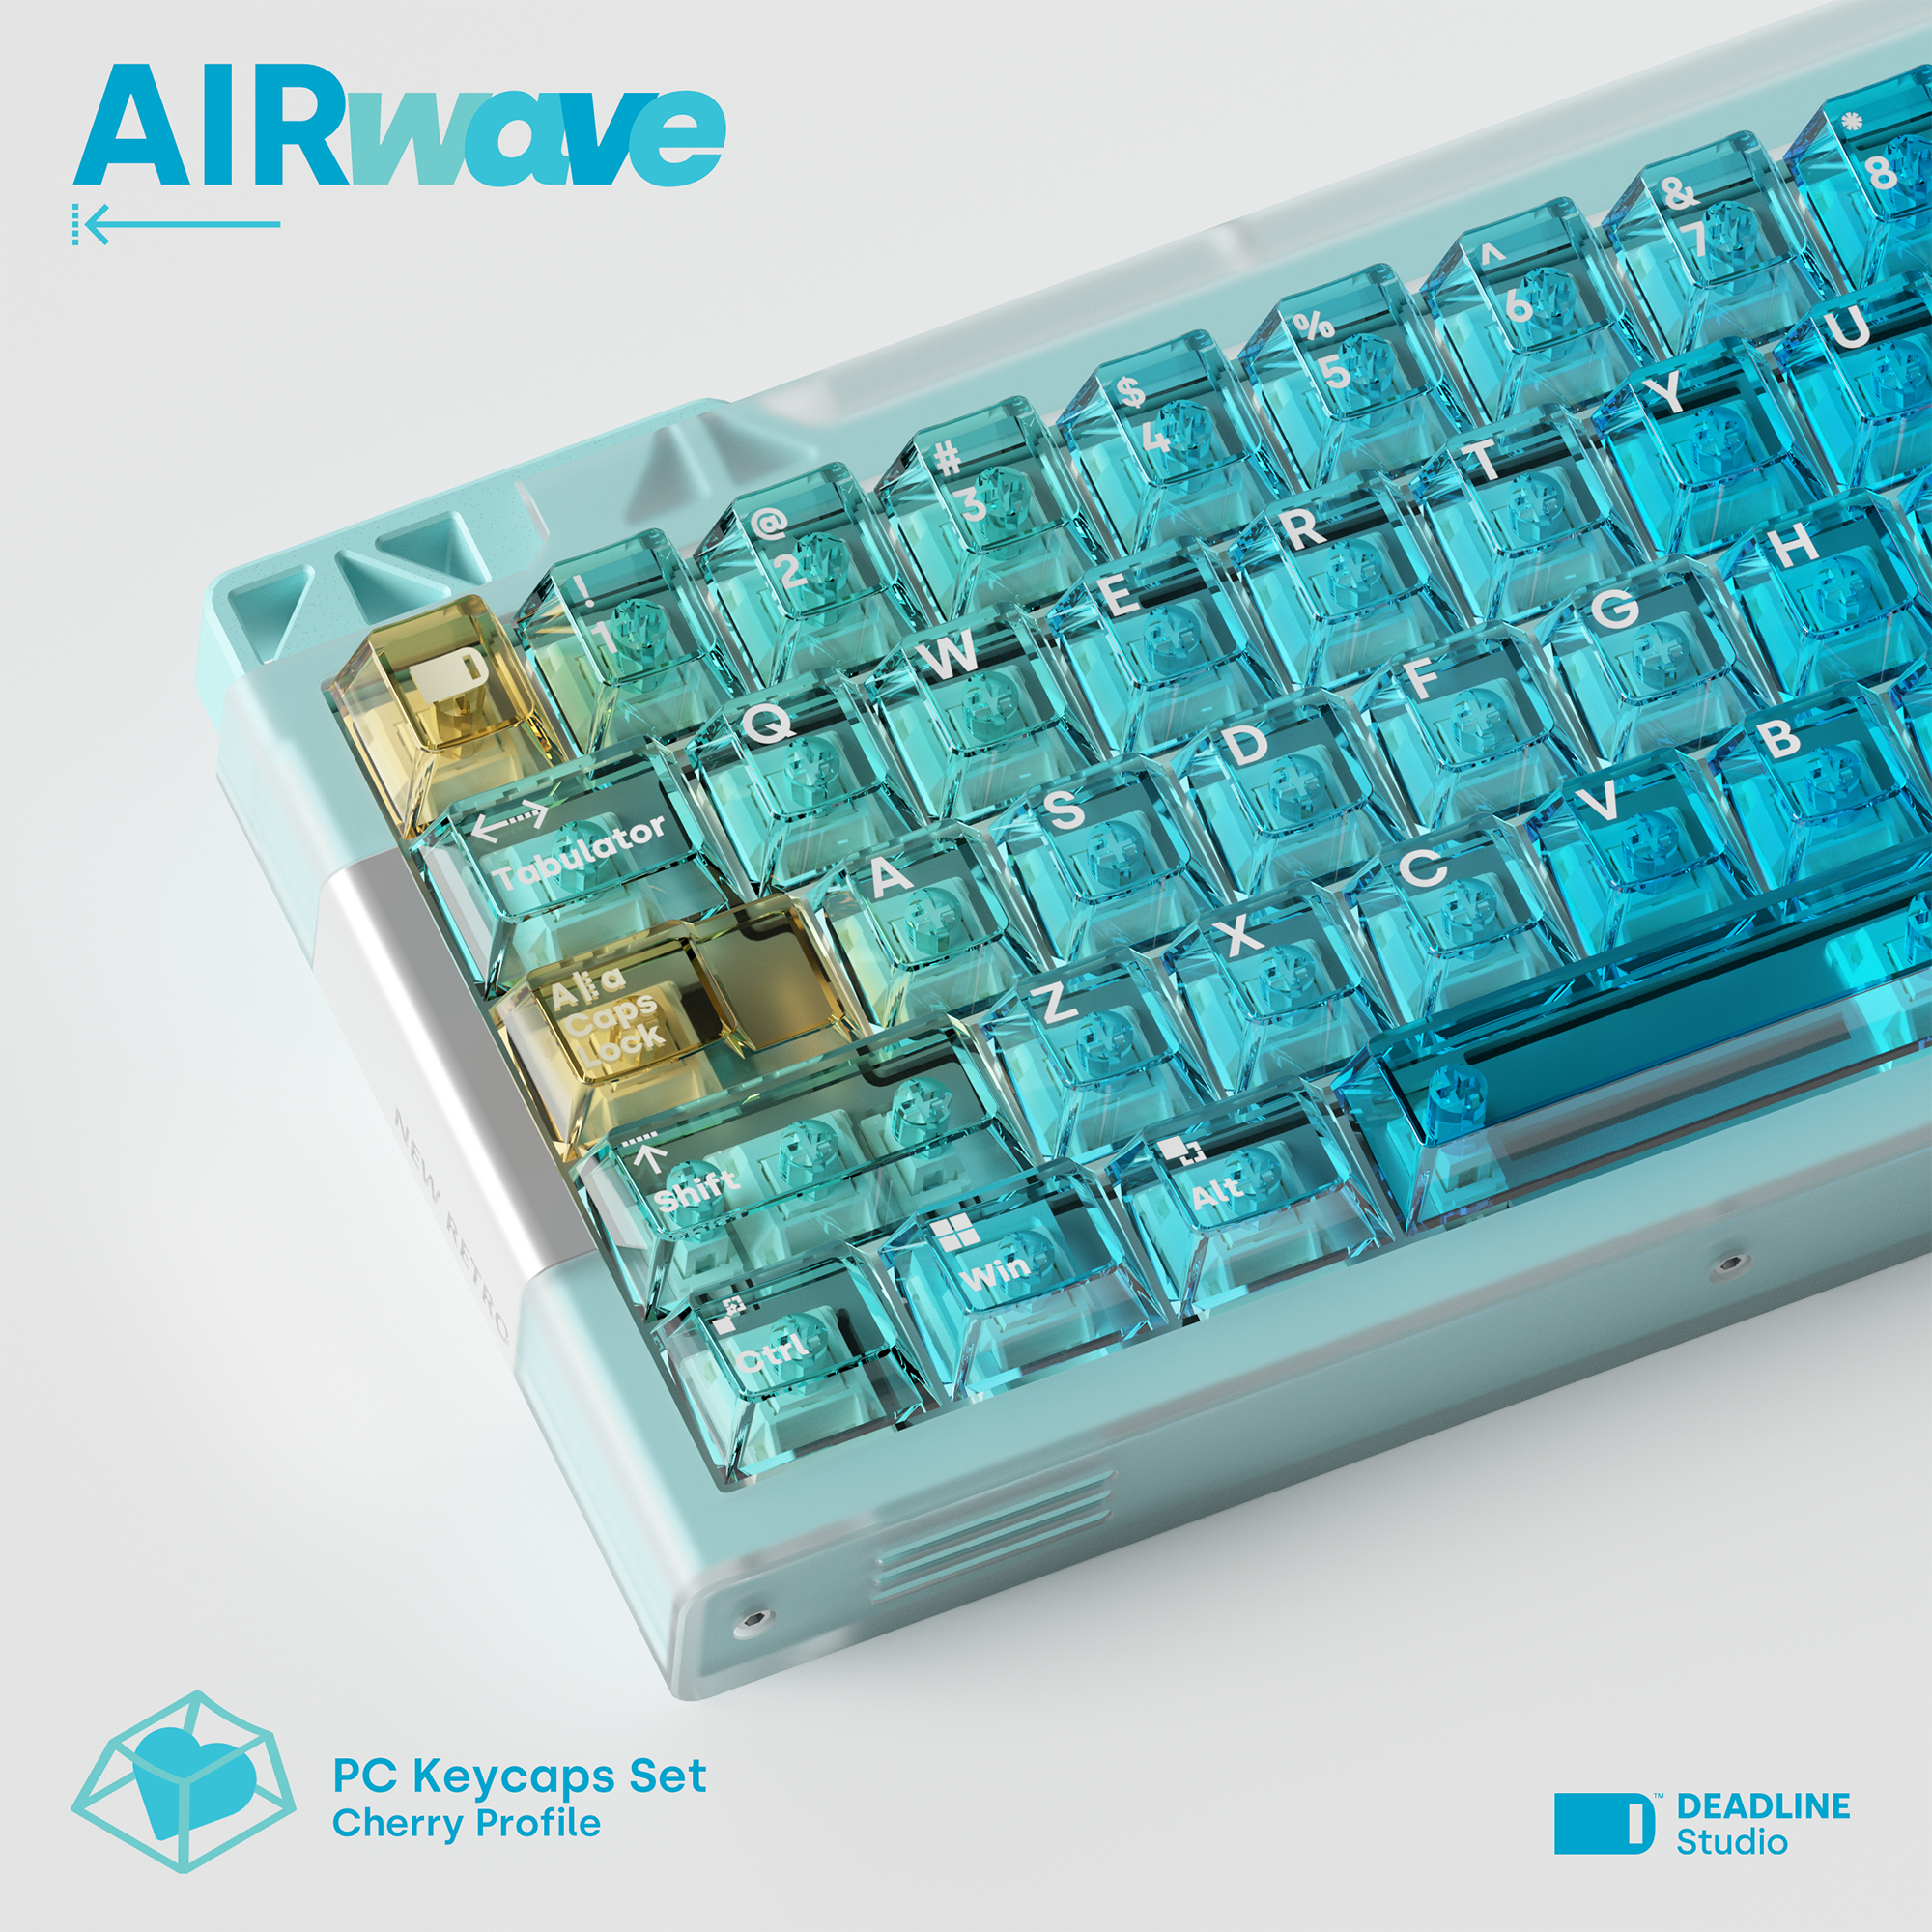 [Coming Soon] AIR Wave Keycaps by Deadline Studio - KeebsForAll